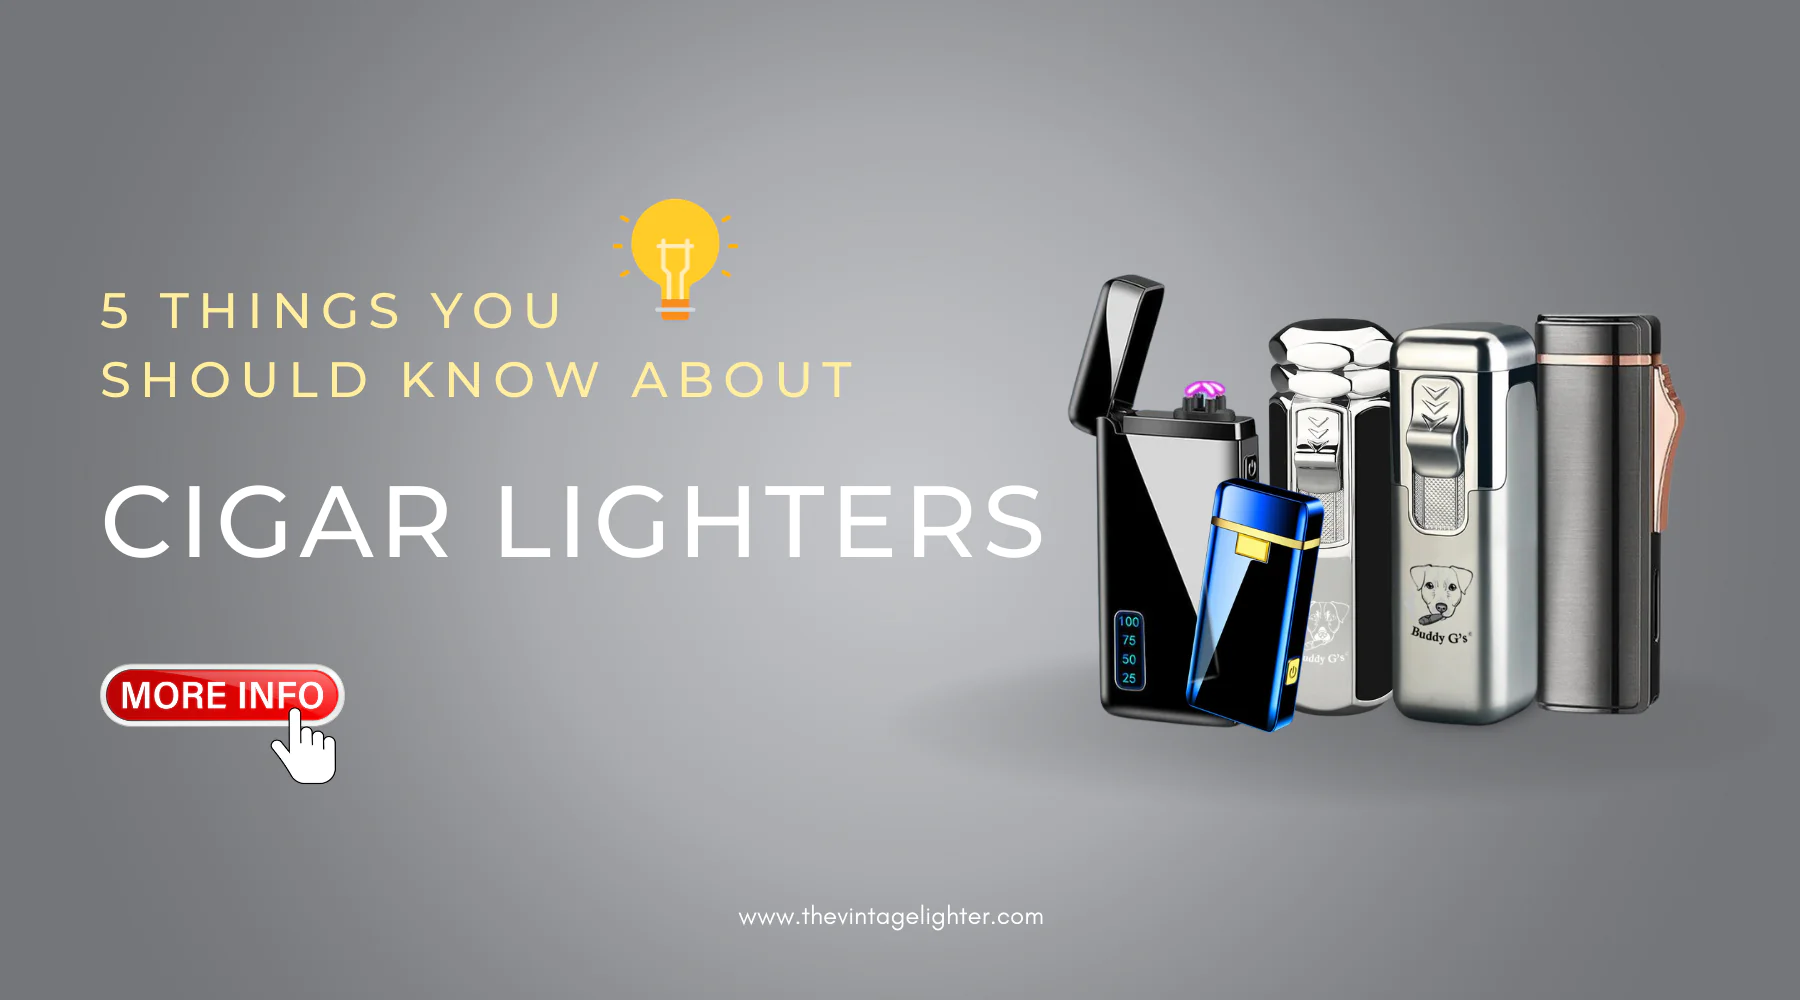 5 Things You Should Know About Cigar Lighters